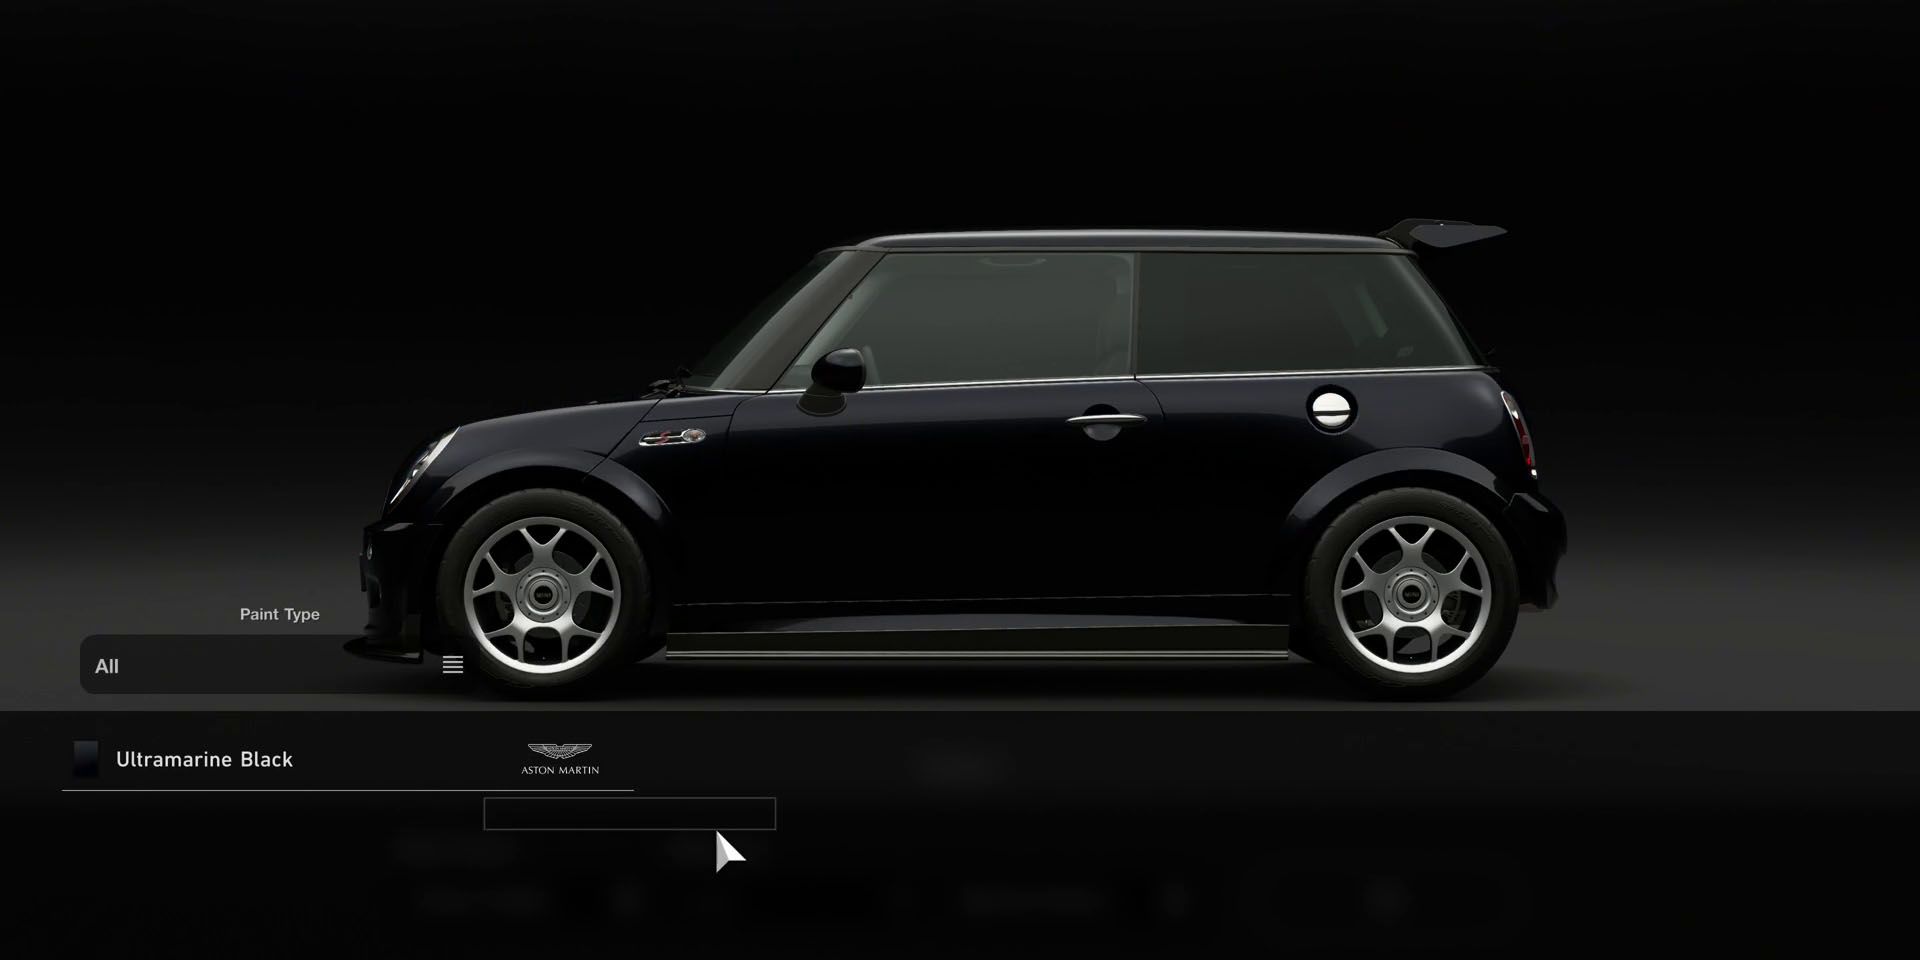 gran-turismo-7-how-to-change-car-color-vehicle-customization-04-souped-up-mini-cooper-s